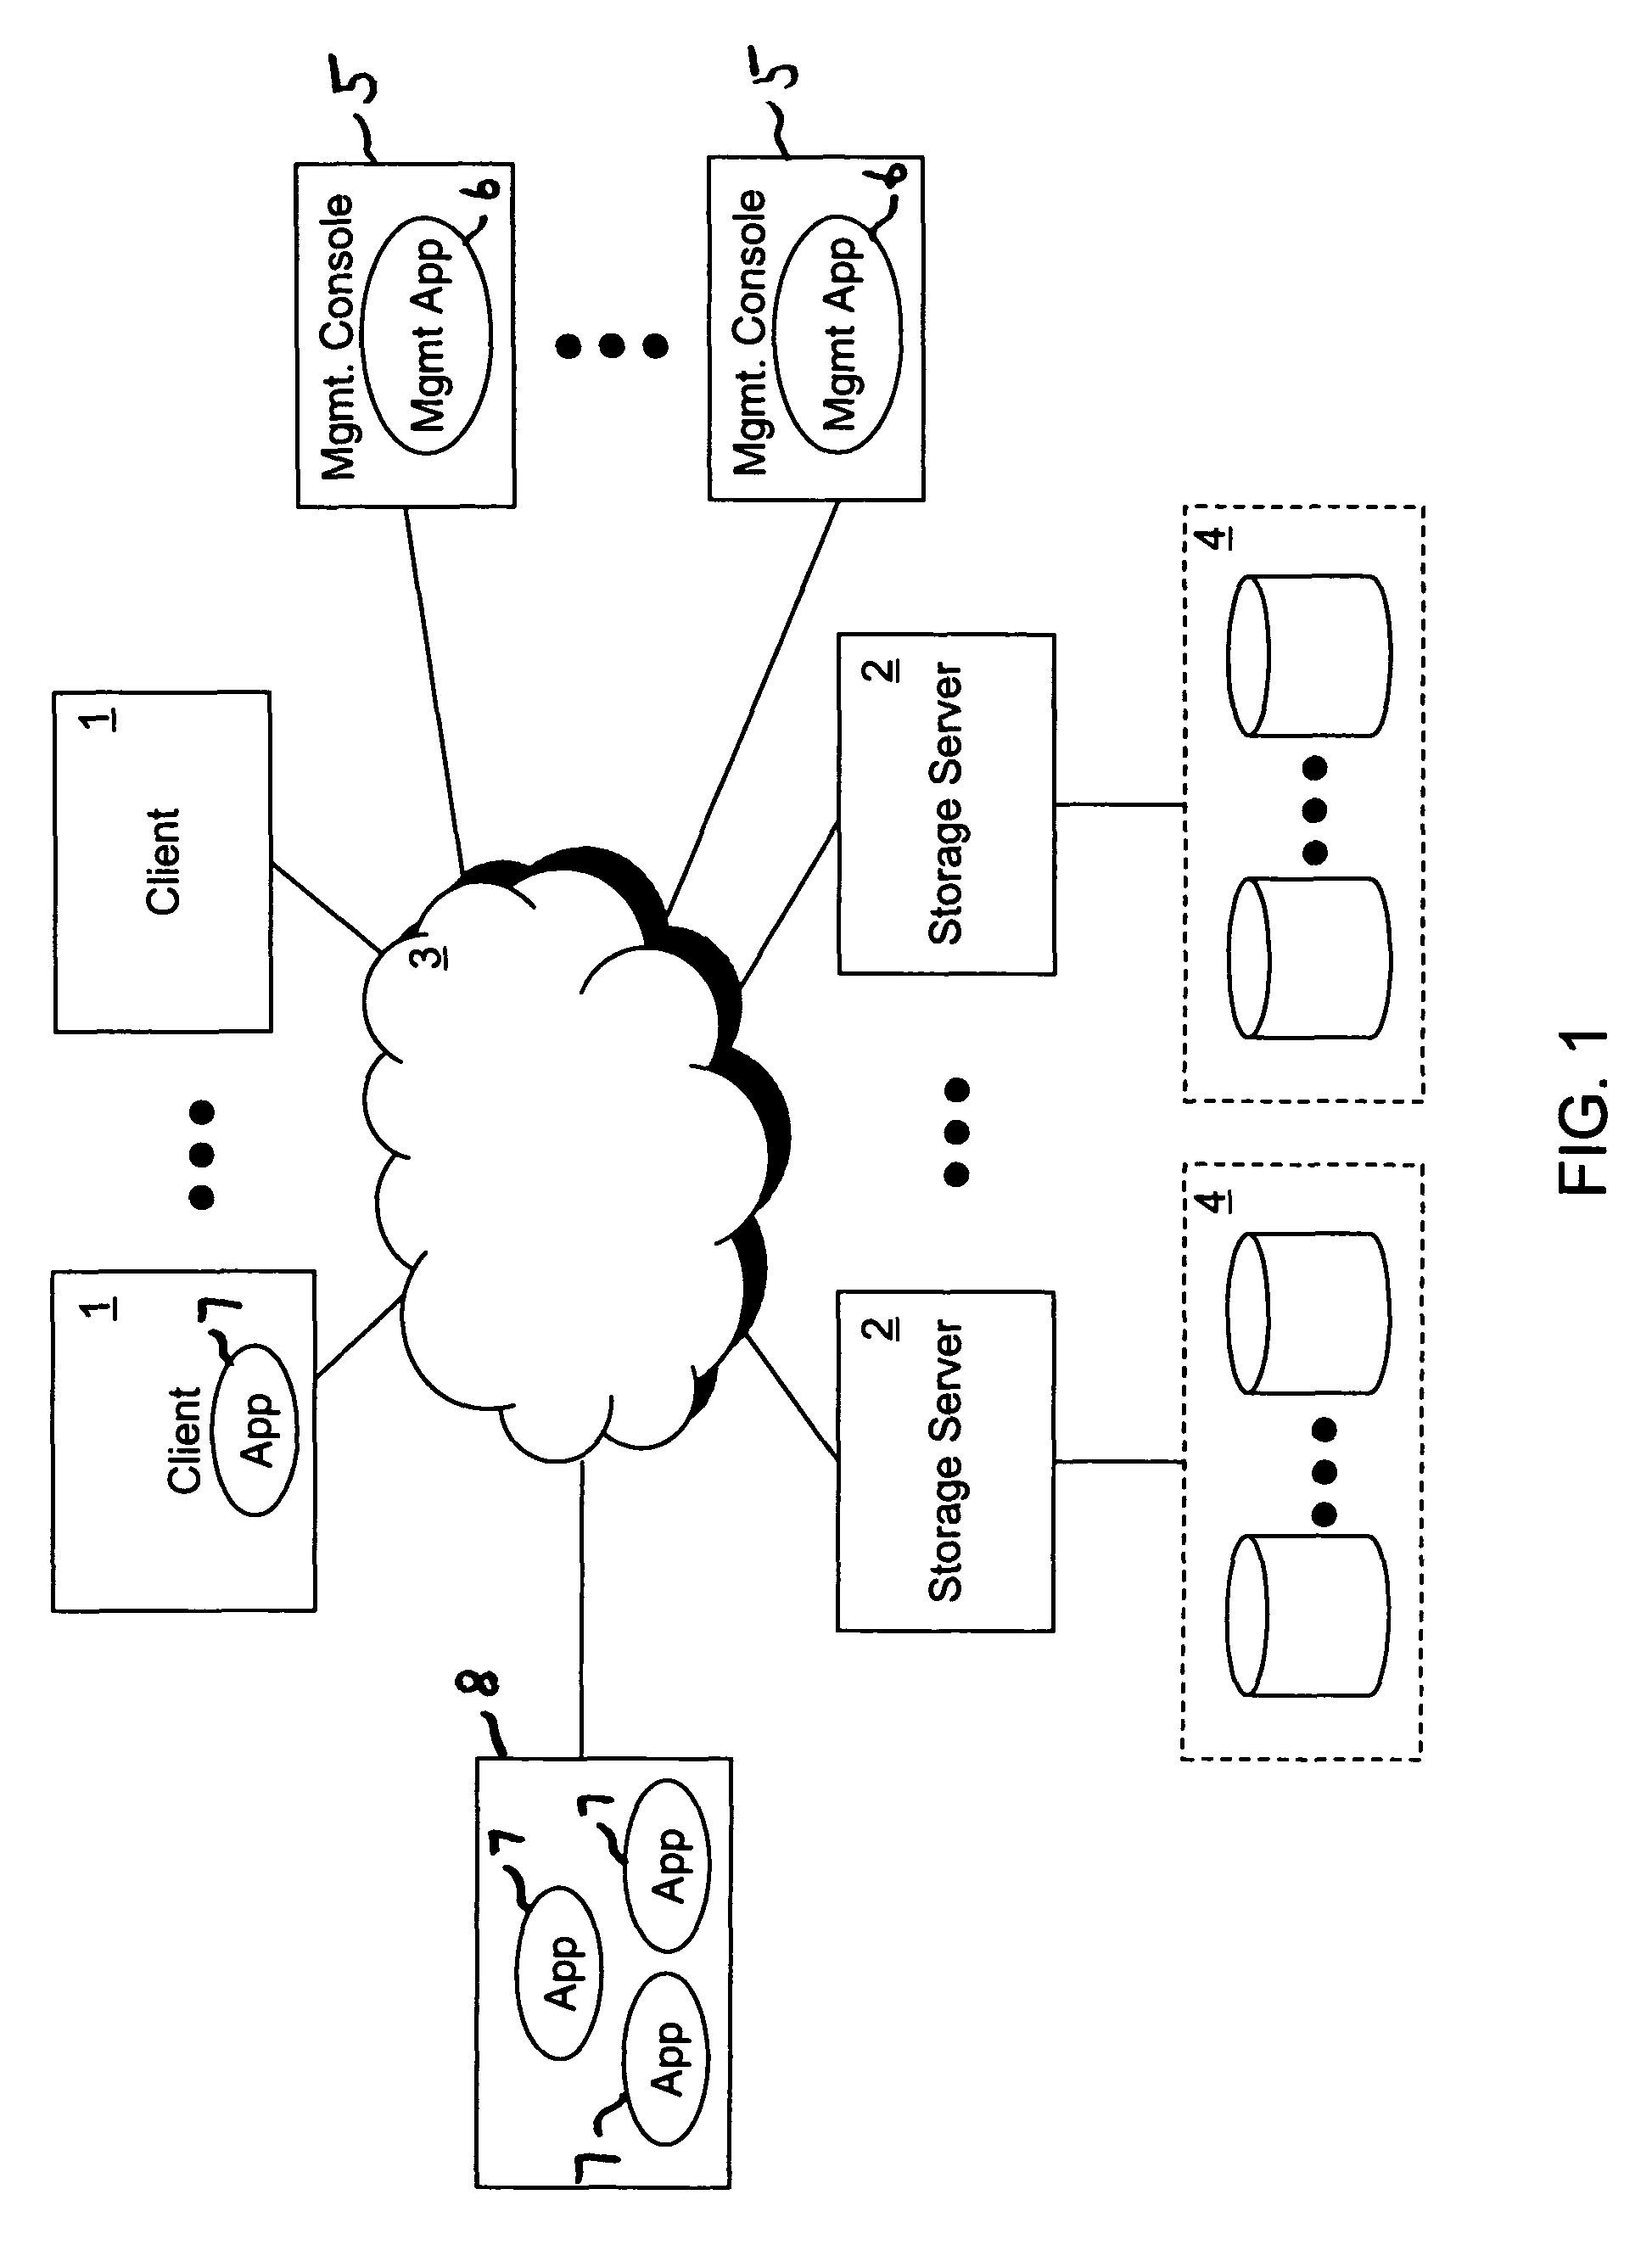 Centralized role-based access control for storage servers